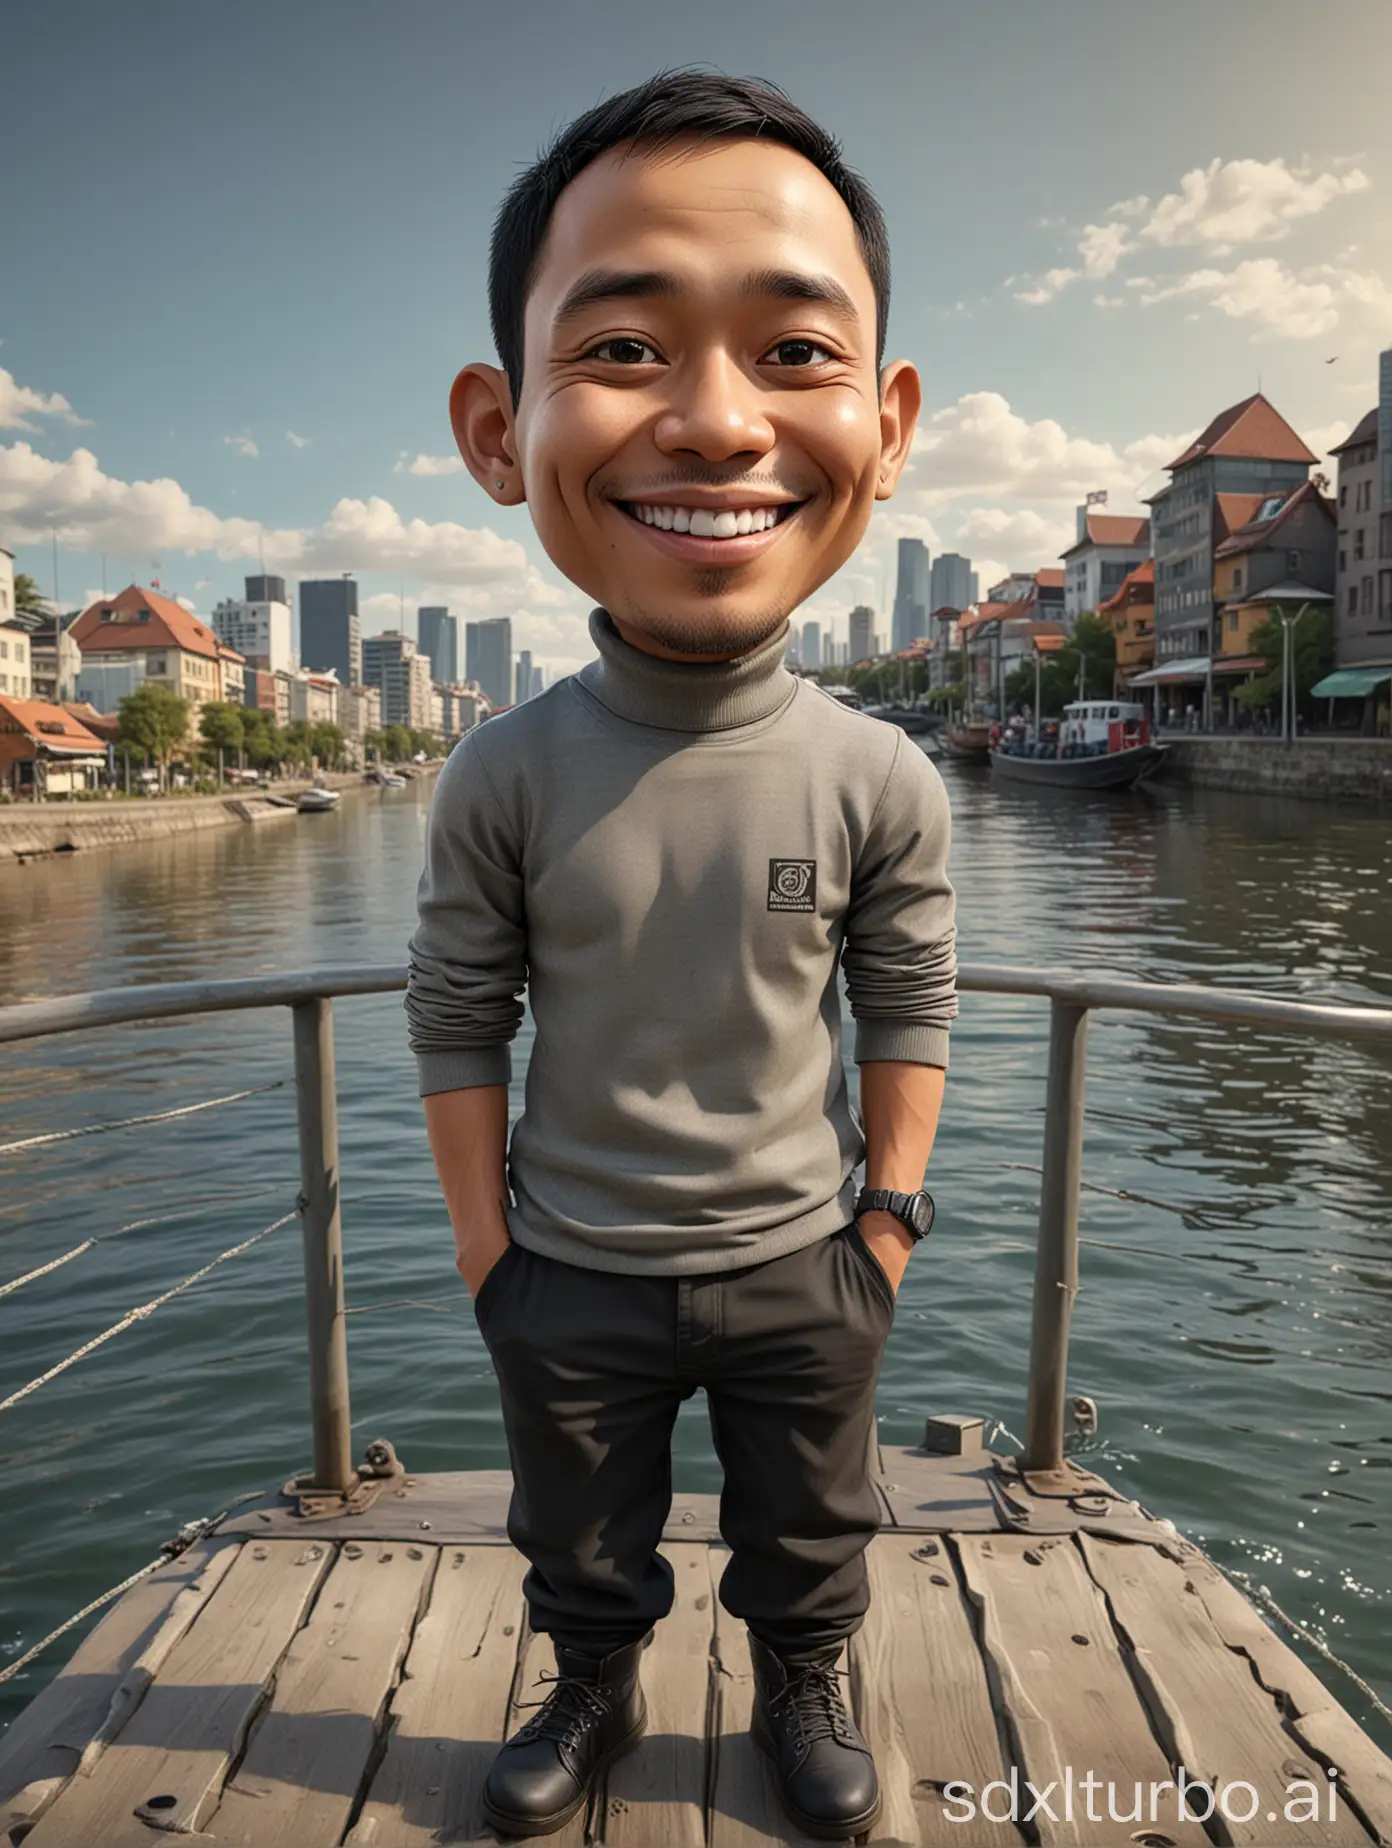 Smiling-Indonesian-Man-Riding-Scooter-with-River-and-Bridge-Background